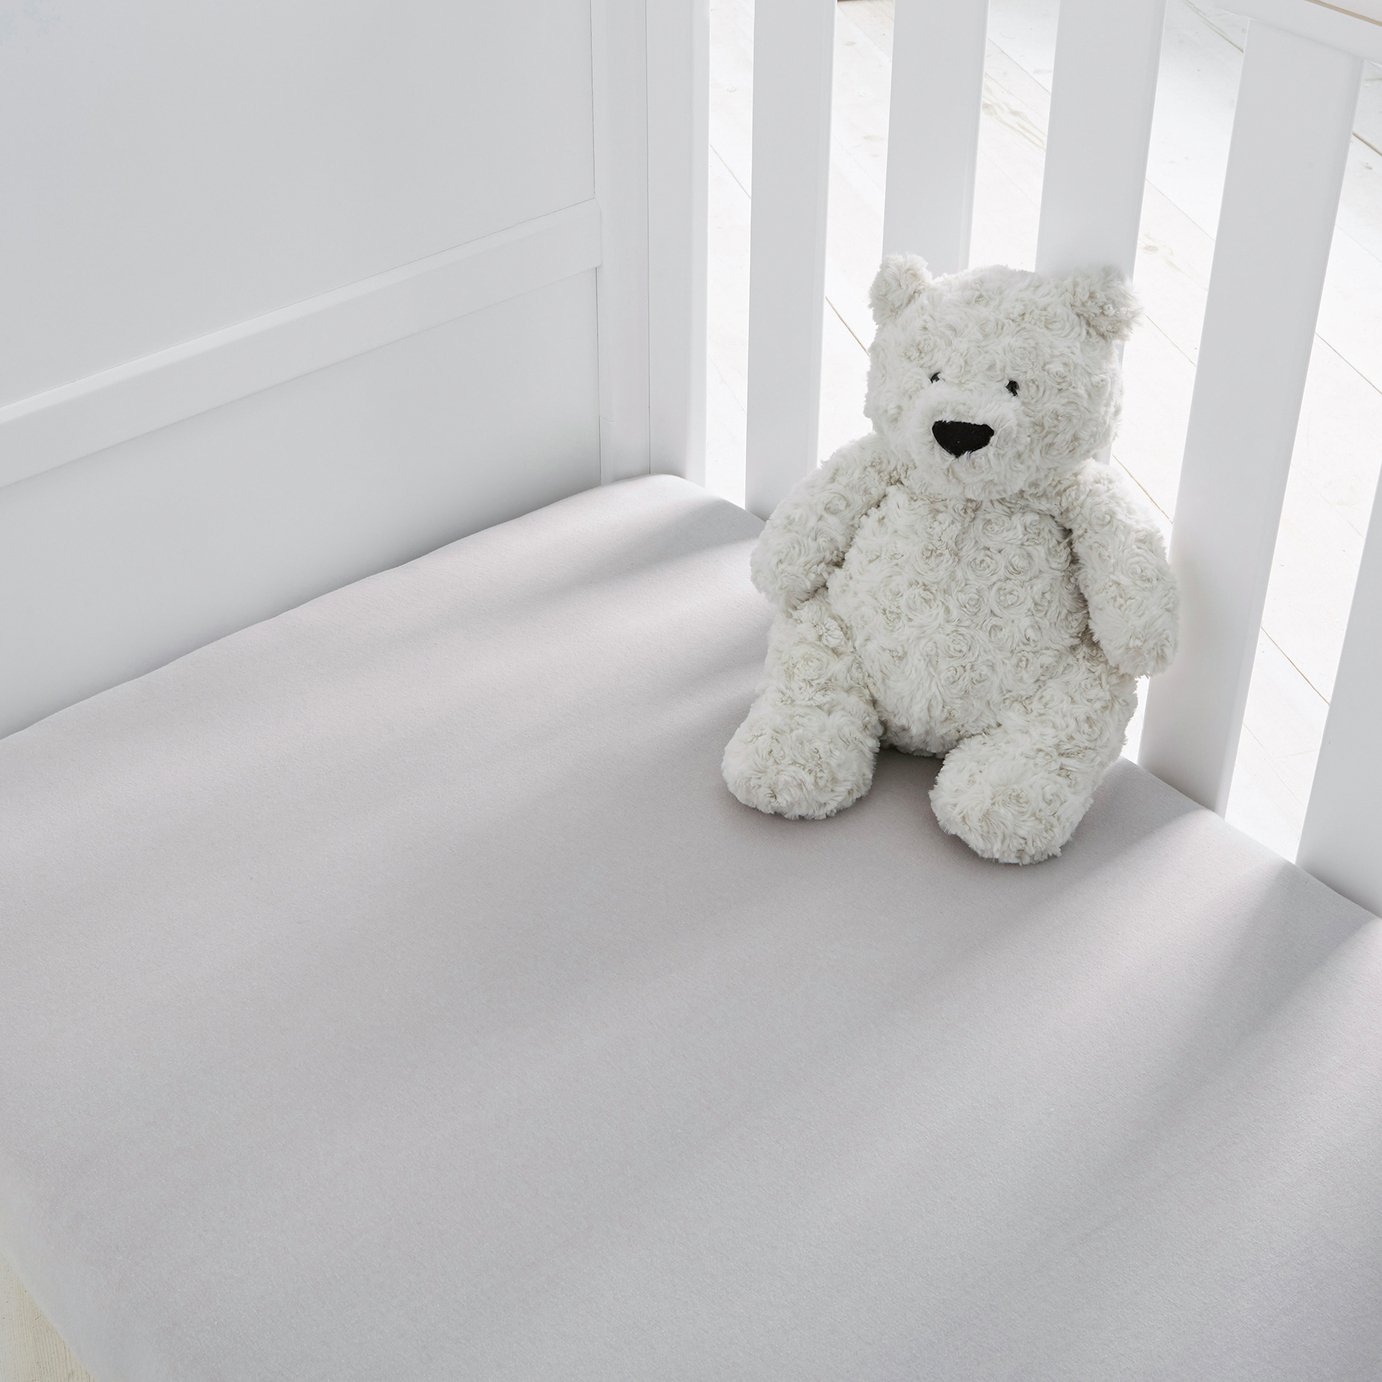 Silentnight Safe Nights Fitted Cot Bed Sheets 2 Pack Review